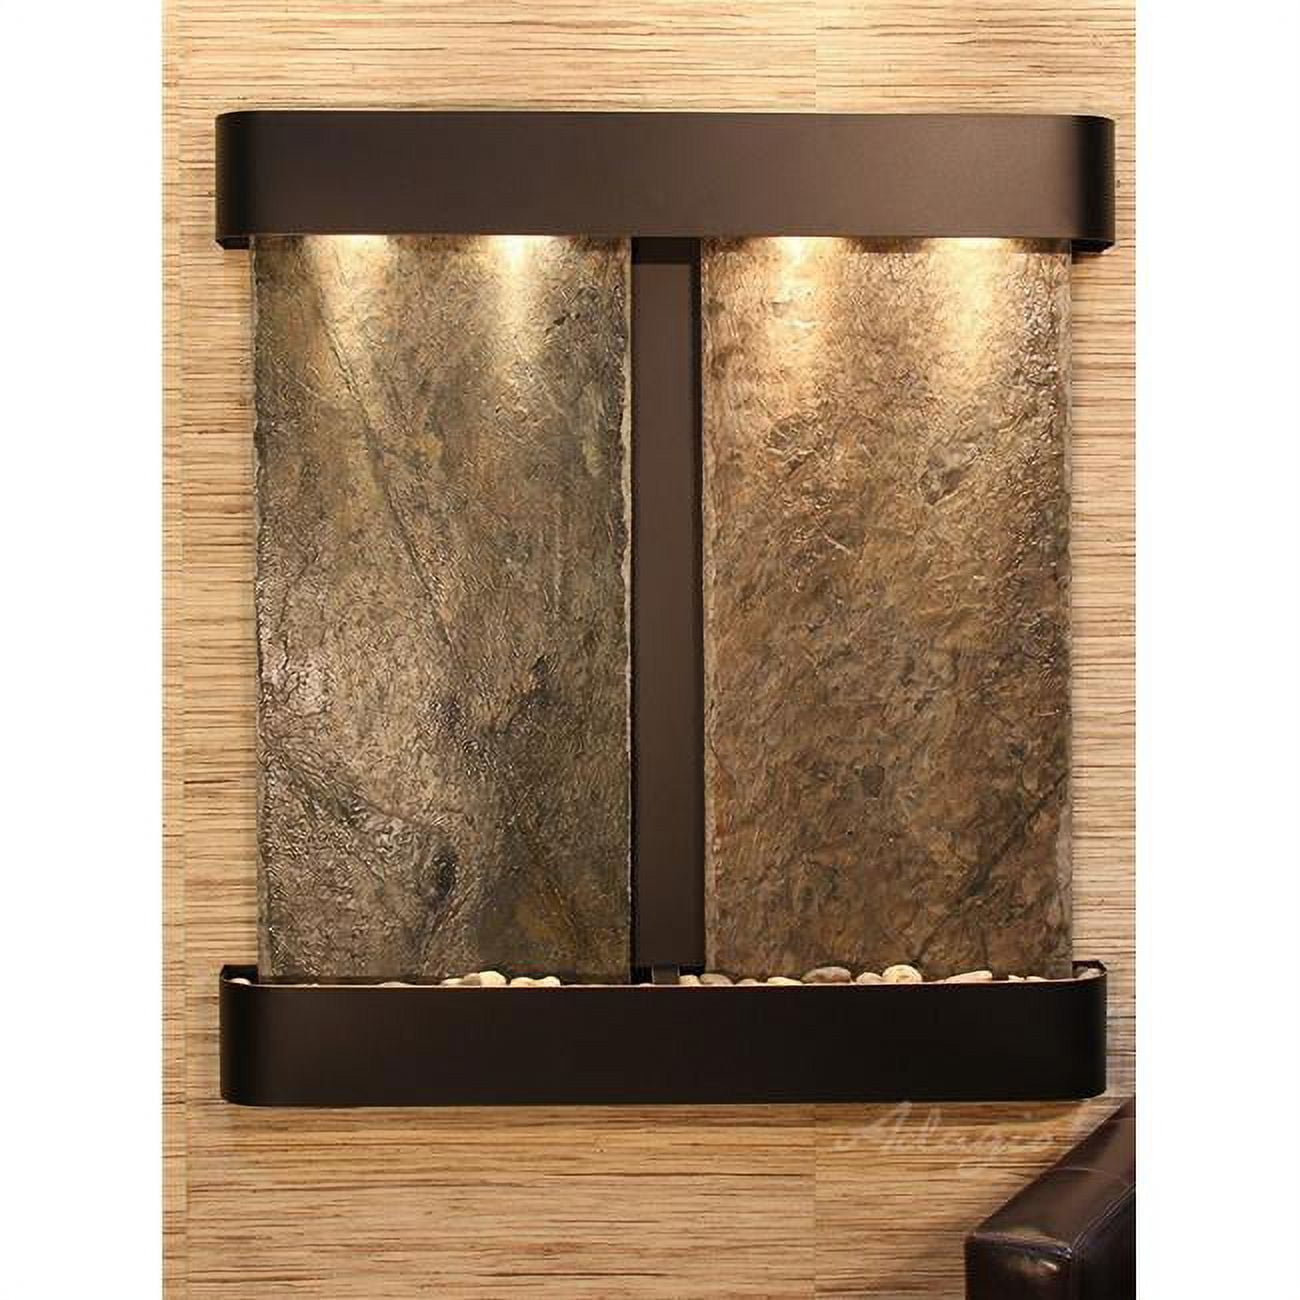 Picture of Adagio AFR1502 Aspen Falls Round Blackened Copper Green Natural Slate Wall Fountain